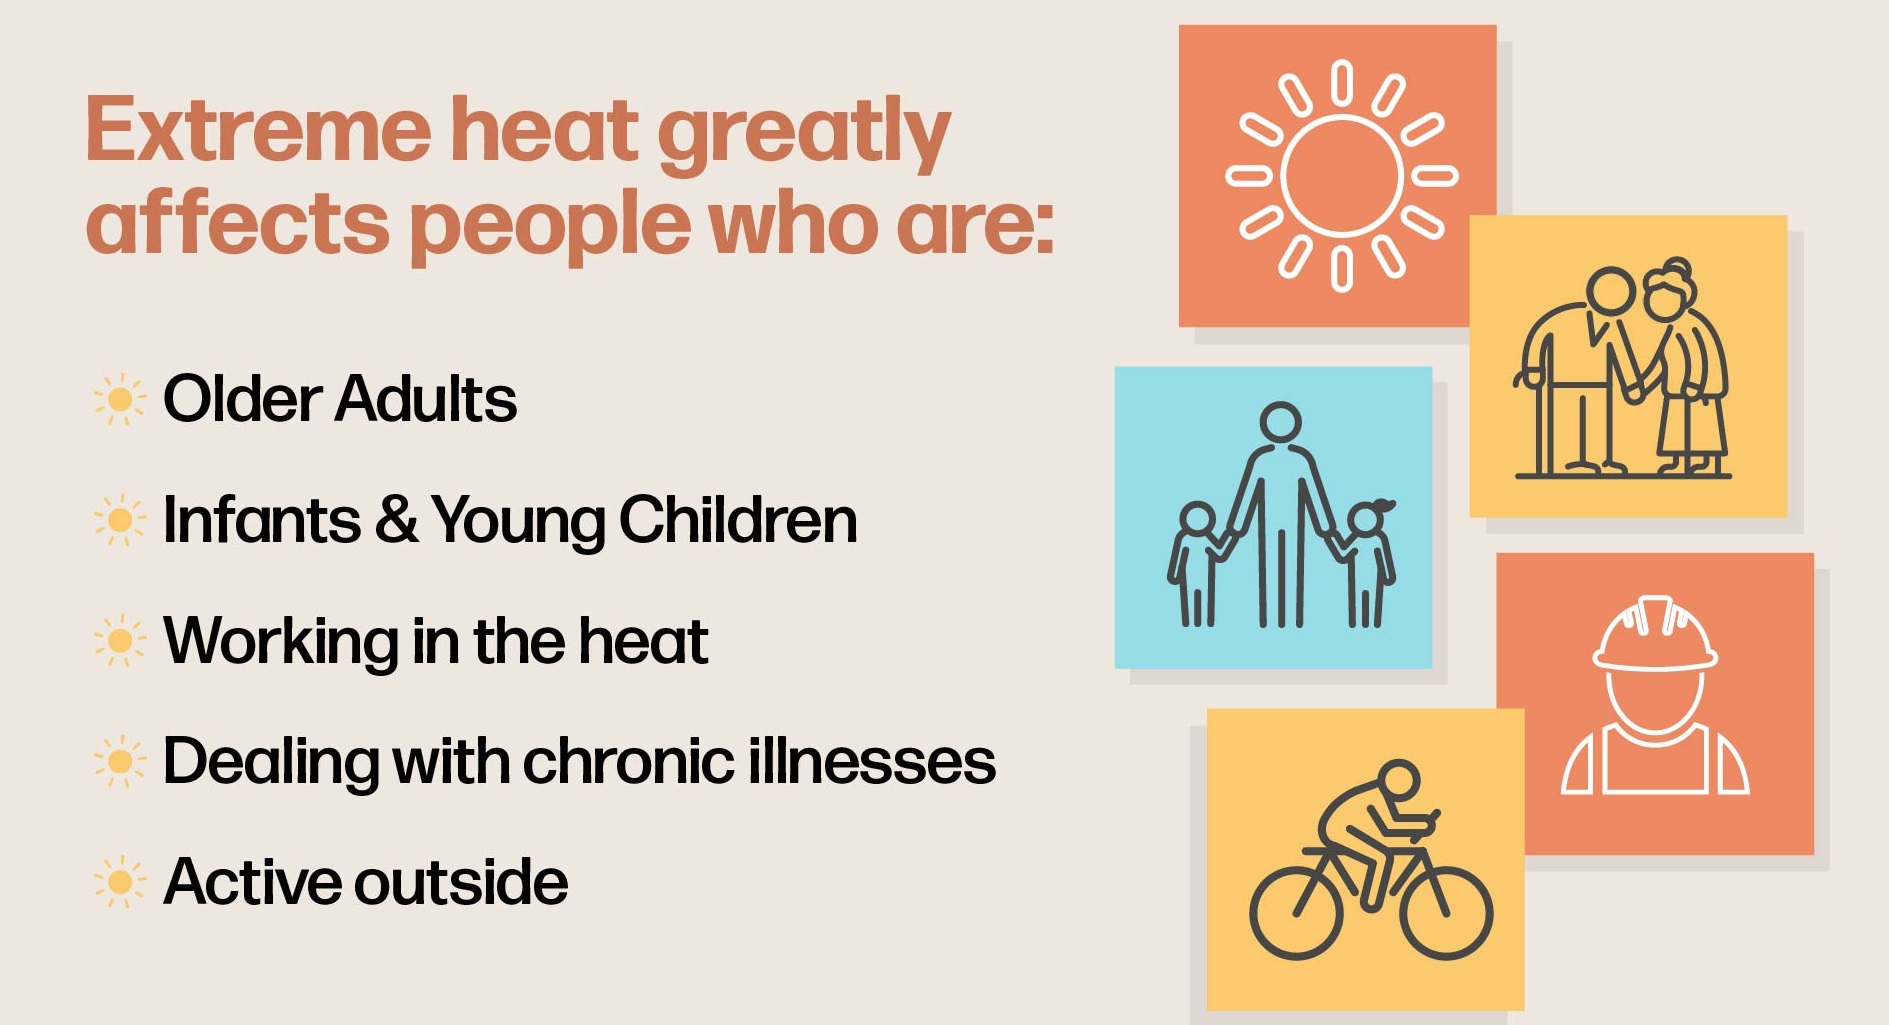 Extreme heat affects